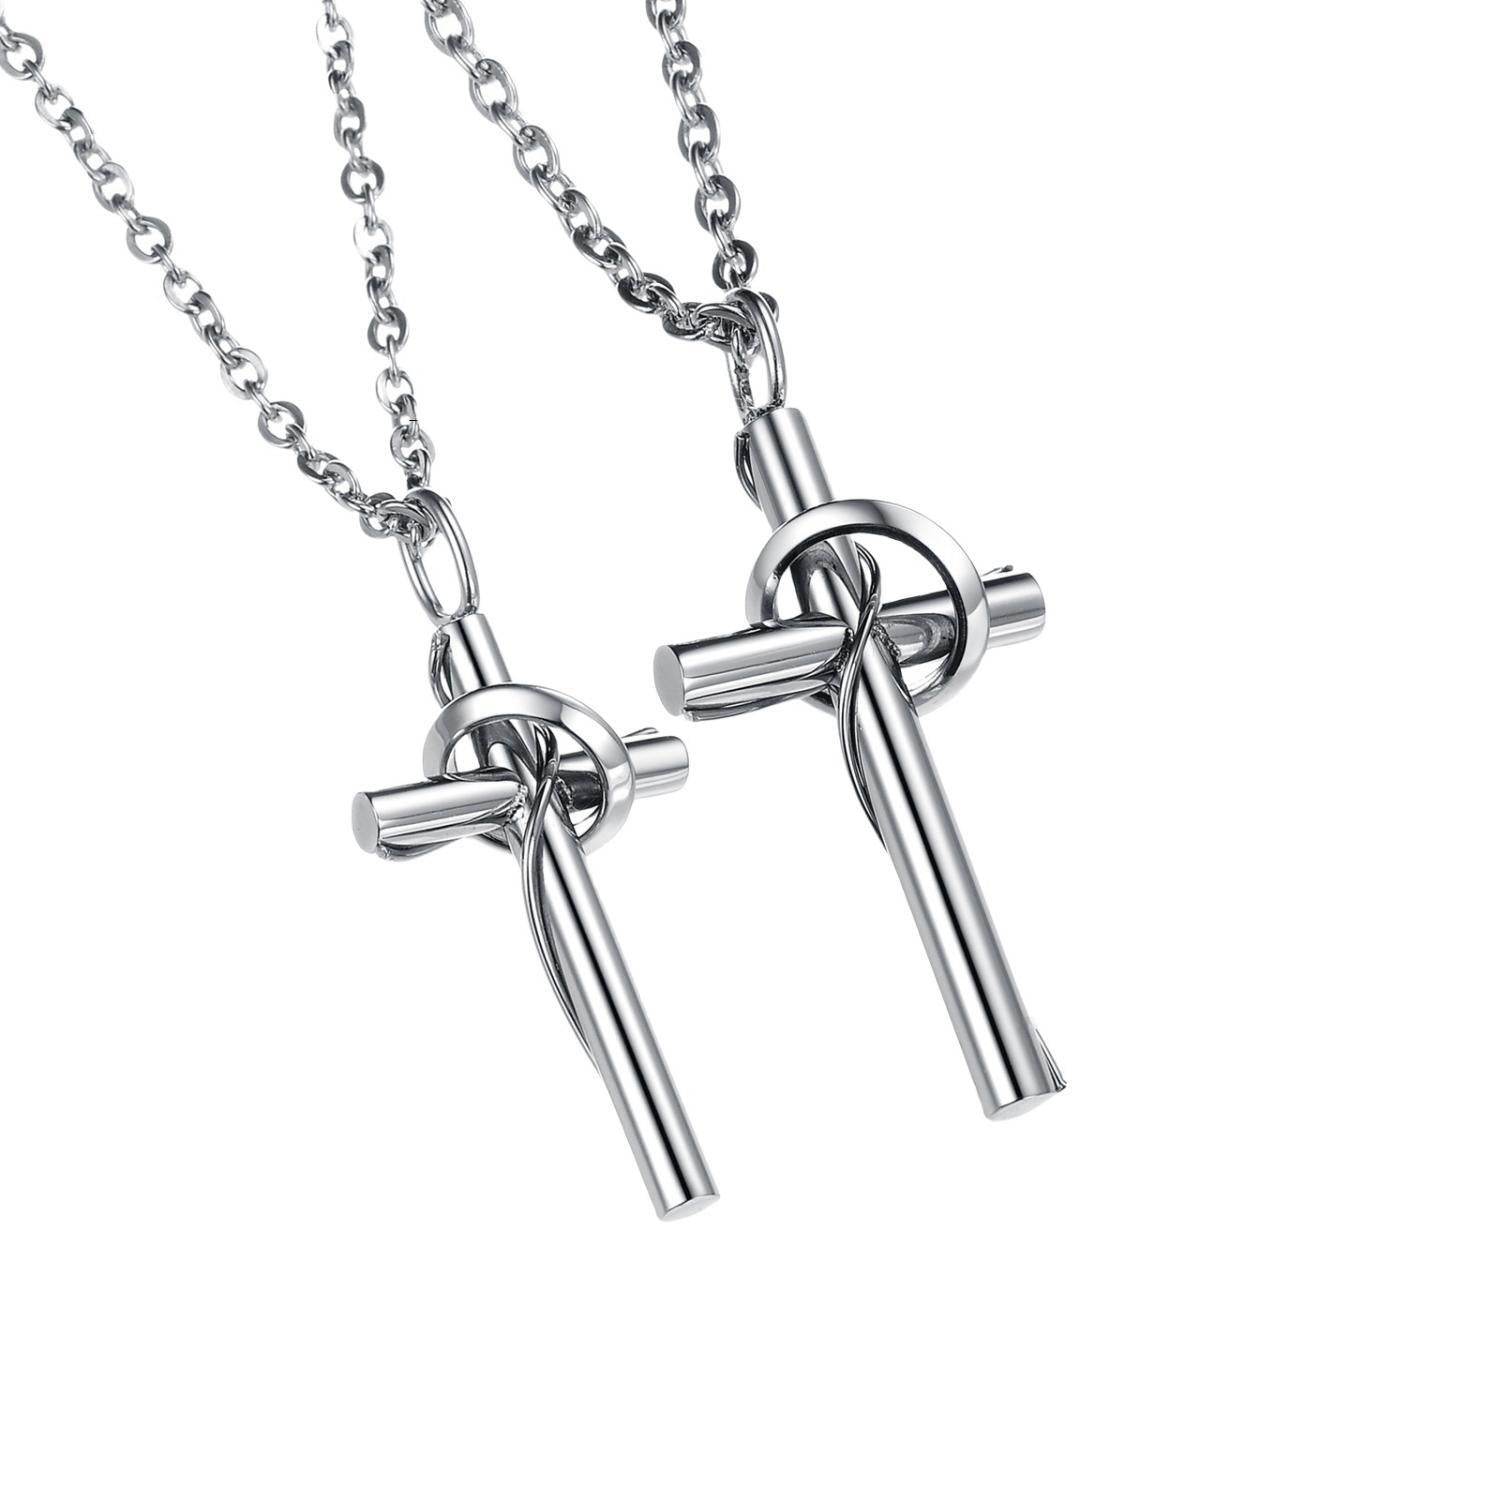 Unique Matching Cross Necklaces For Couples In Titanium - CoupleSets